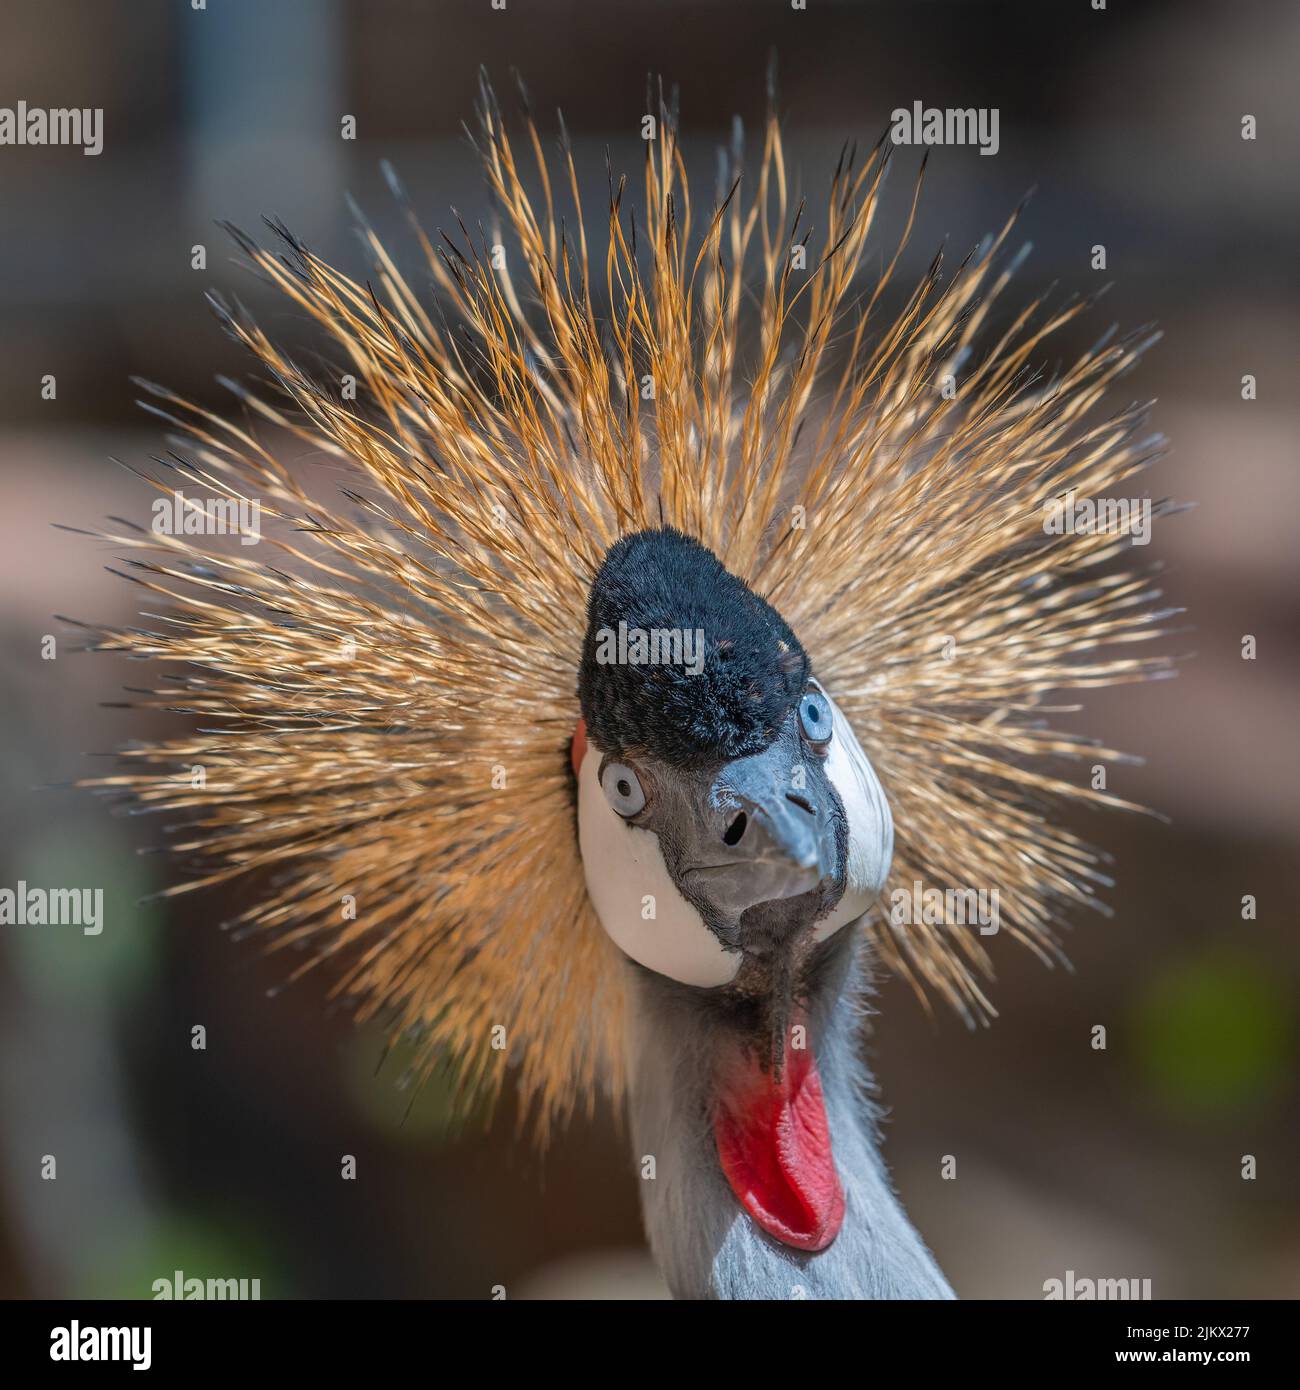 A closeup of a gray crowned crane on a blurry background Stock Photo